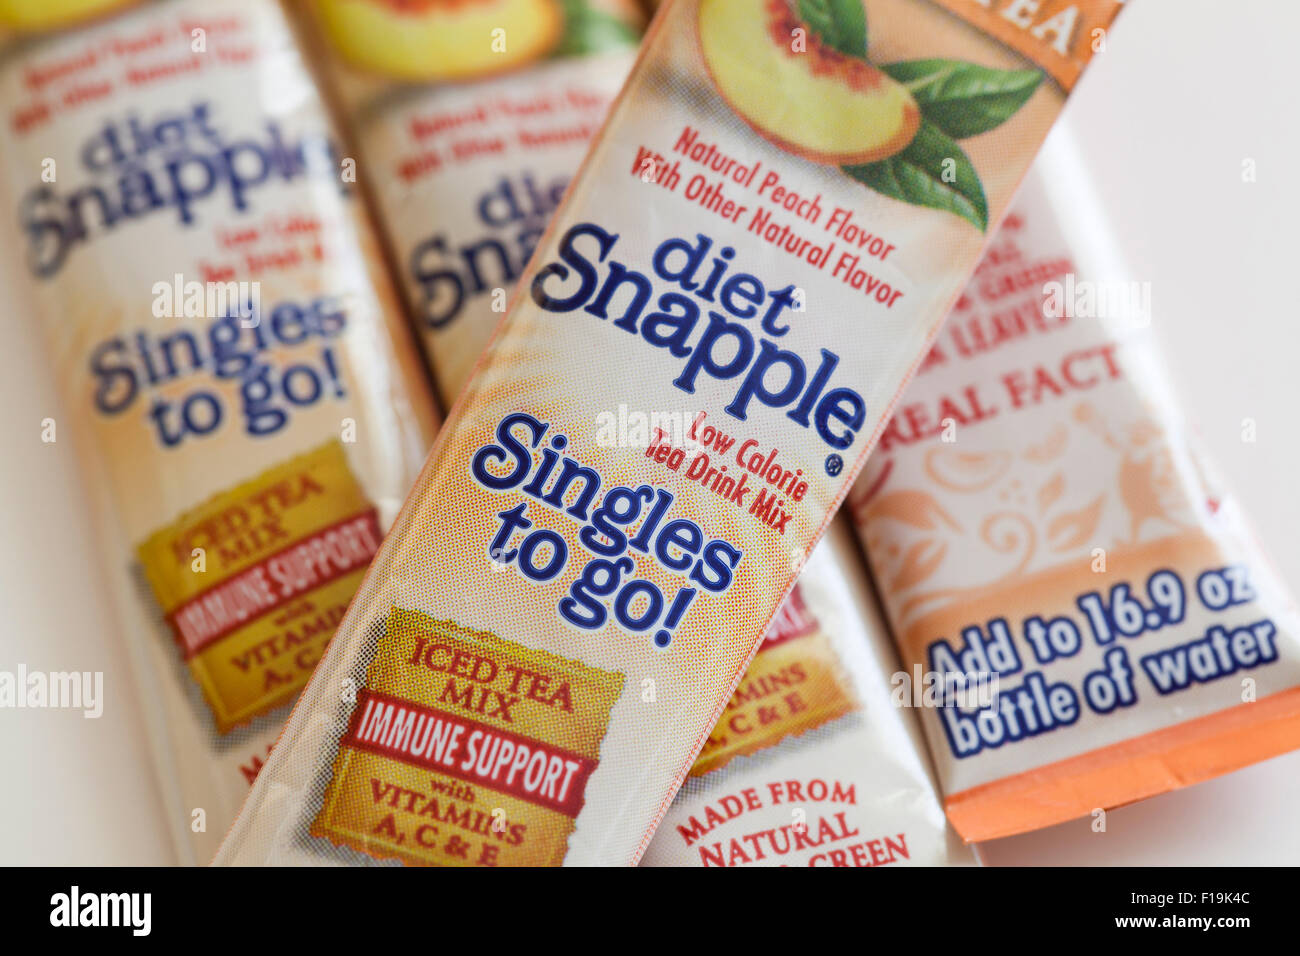 Diet Snapple Singles to Go iced tea mix packages - USA Stock Photo